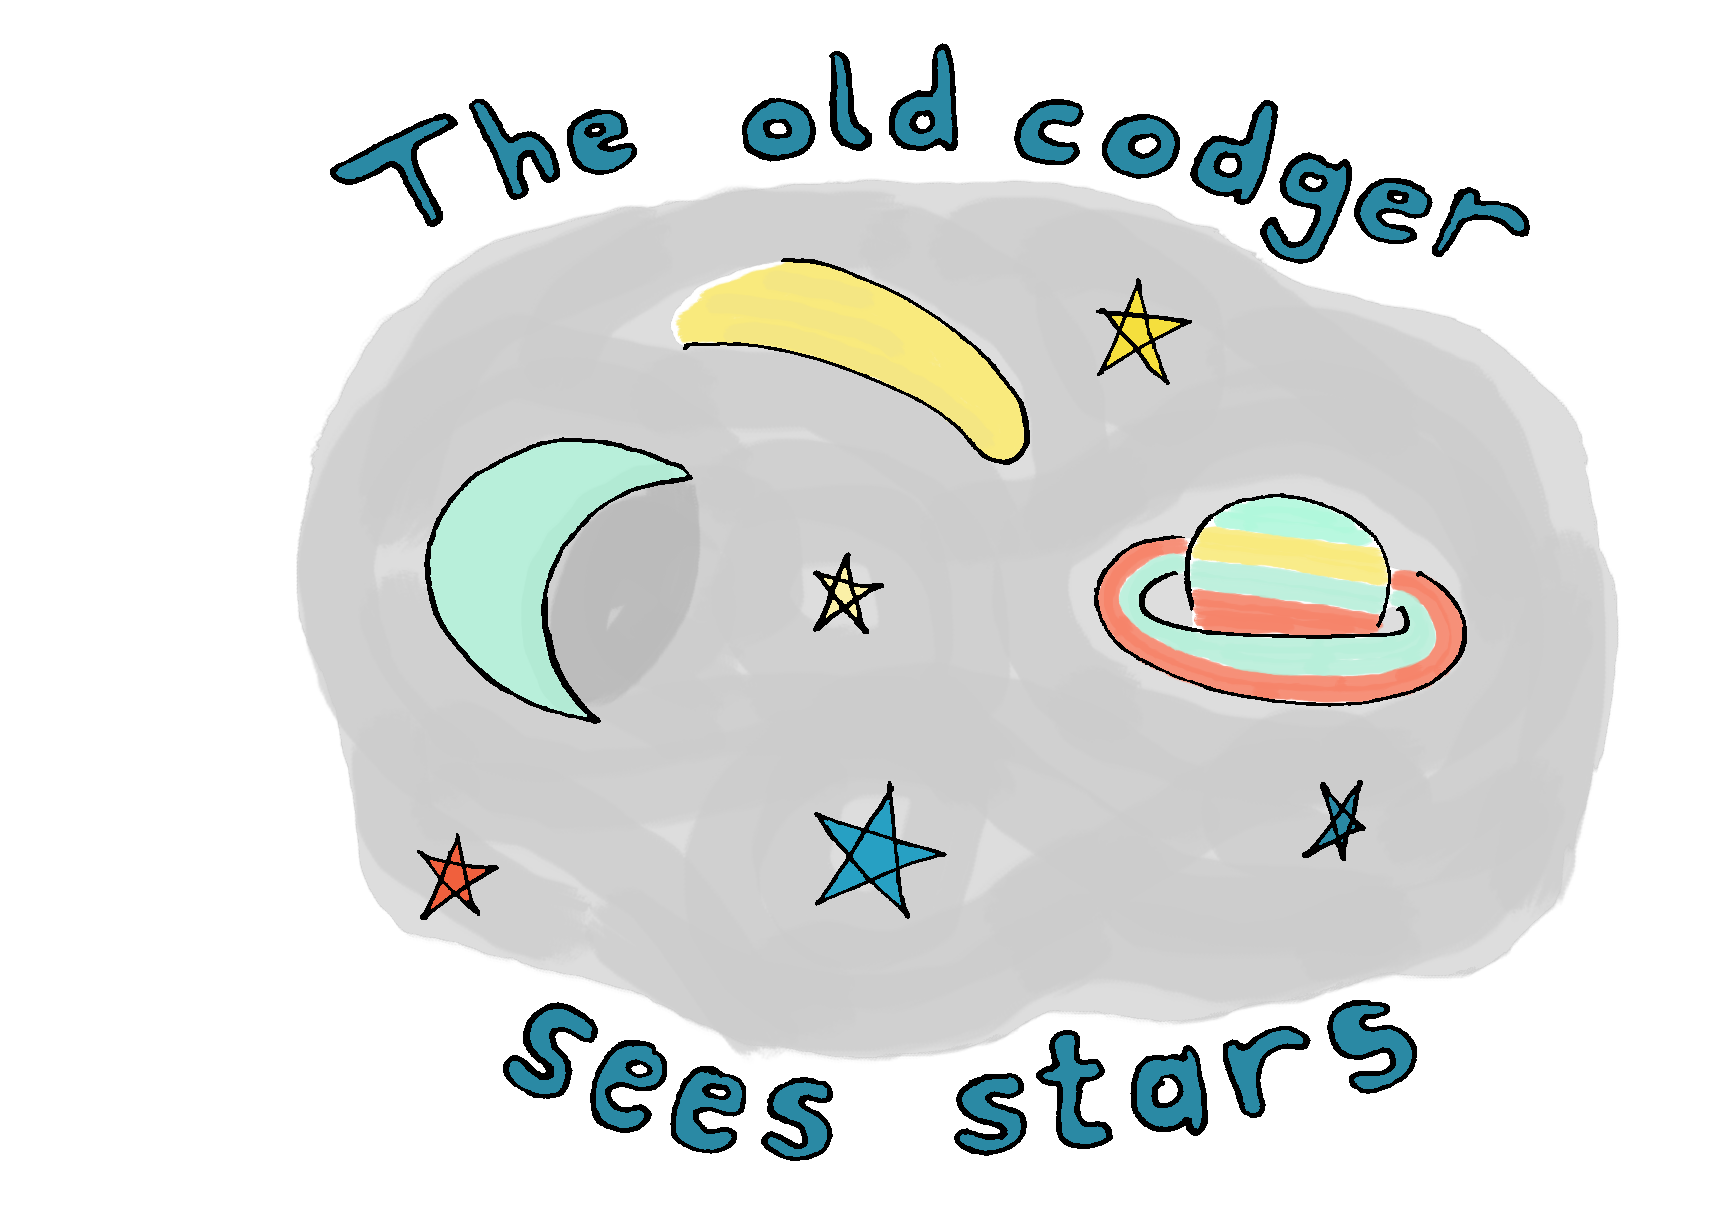 The old codger sees stars